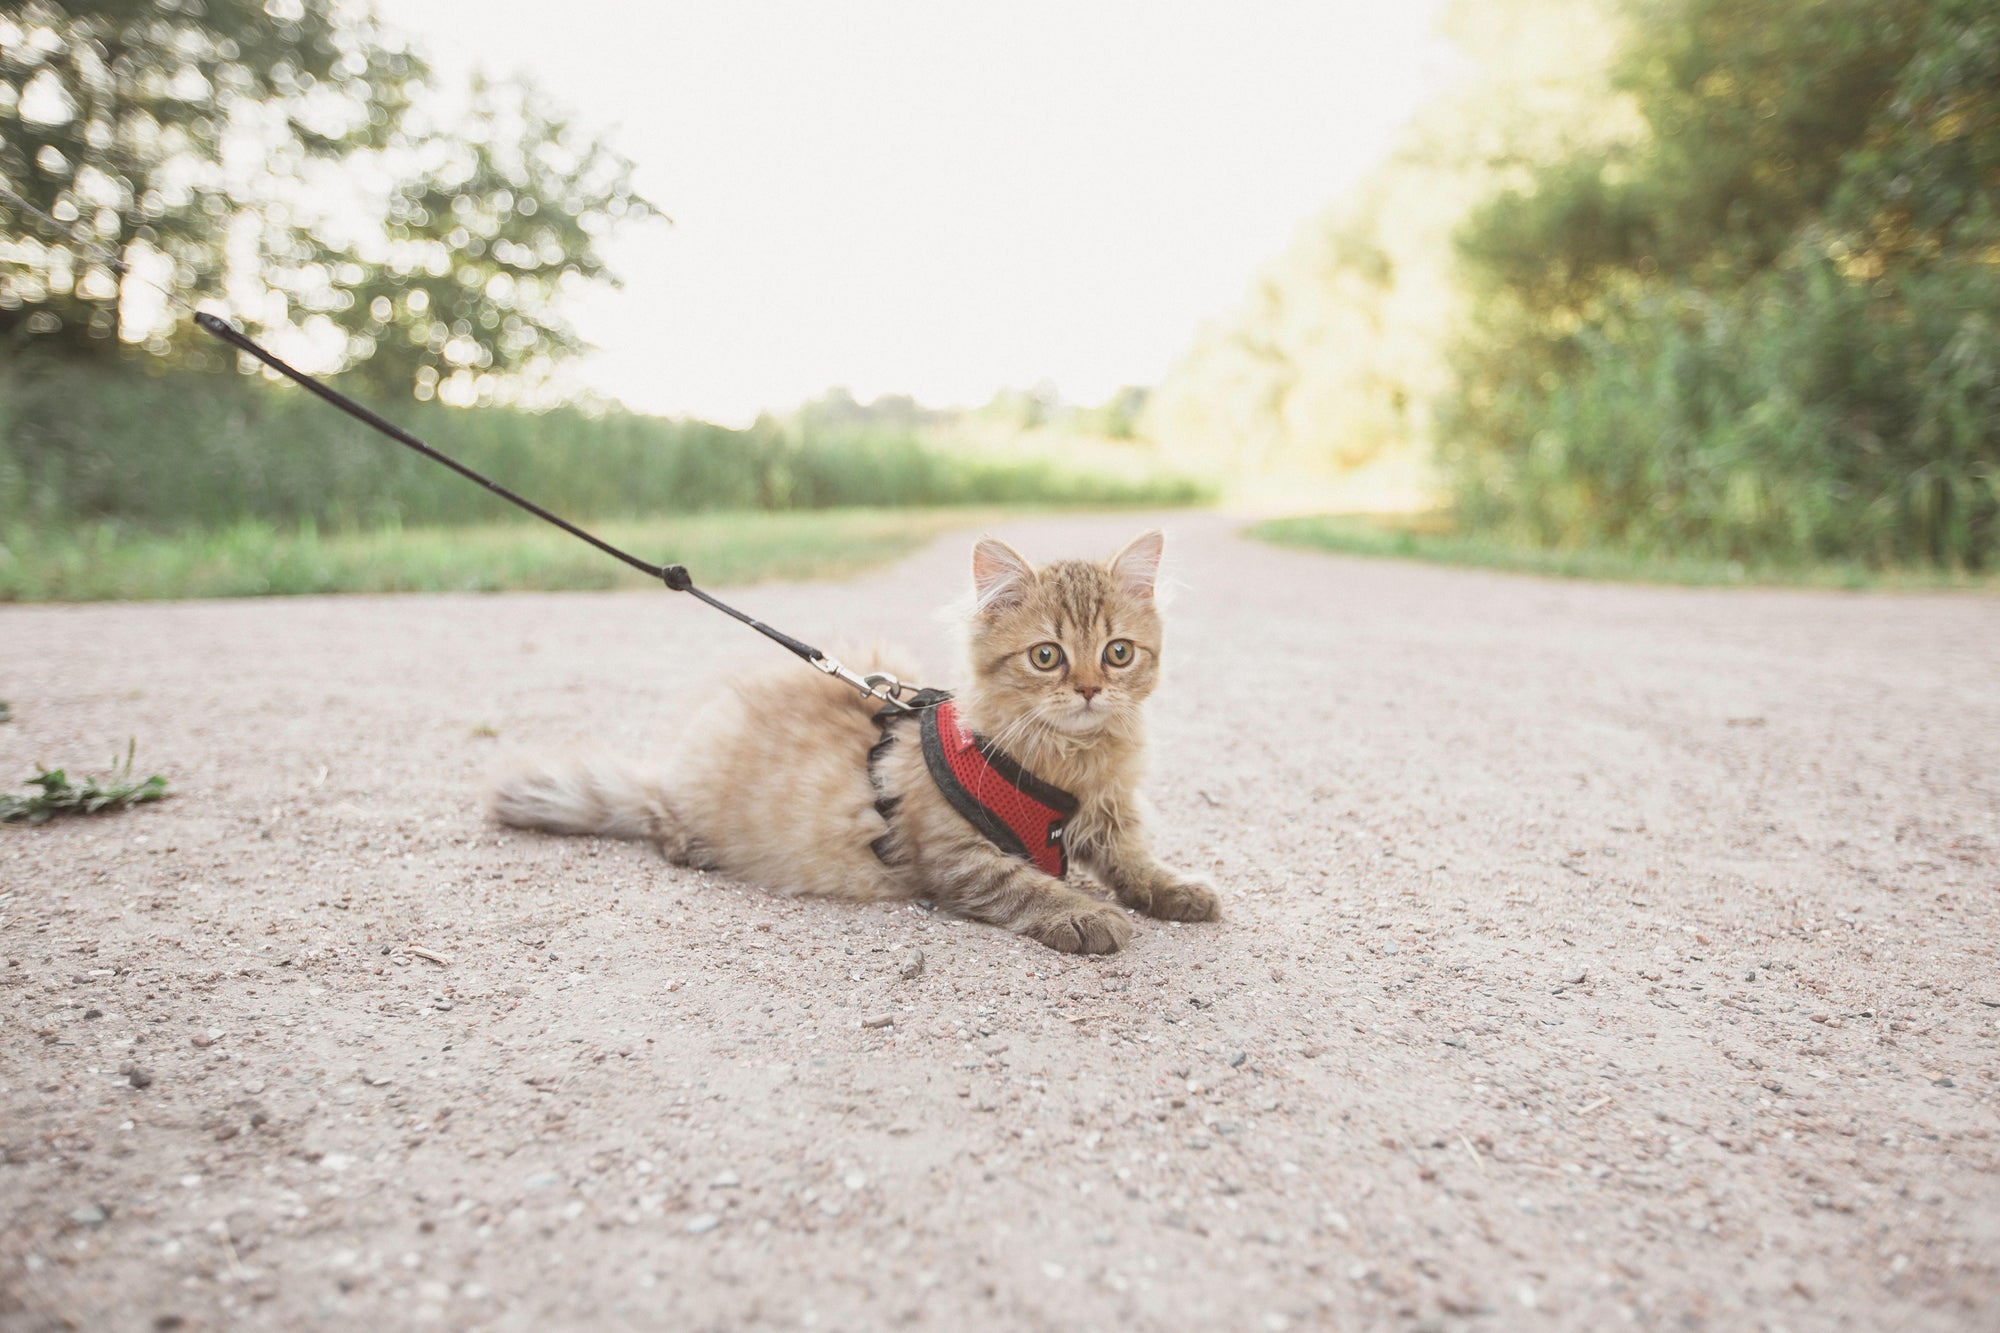 How to Train a Cat to Walk on a Leash